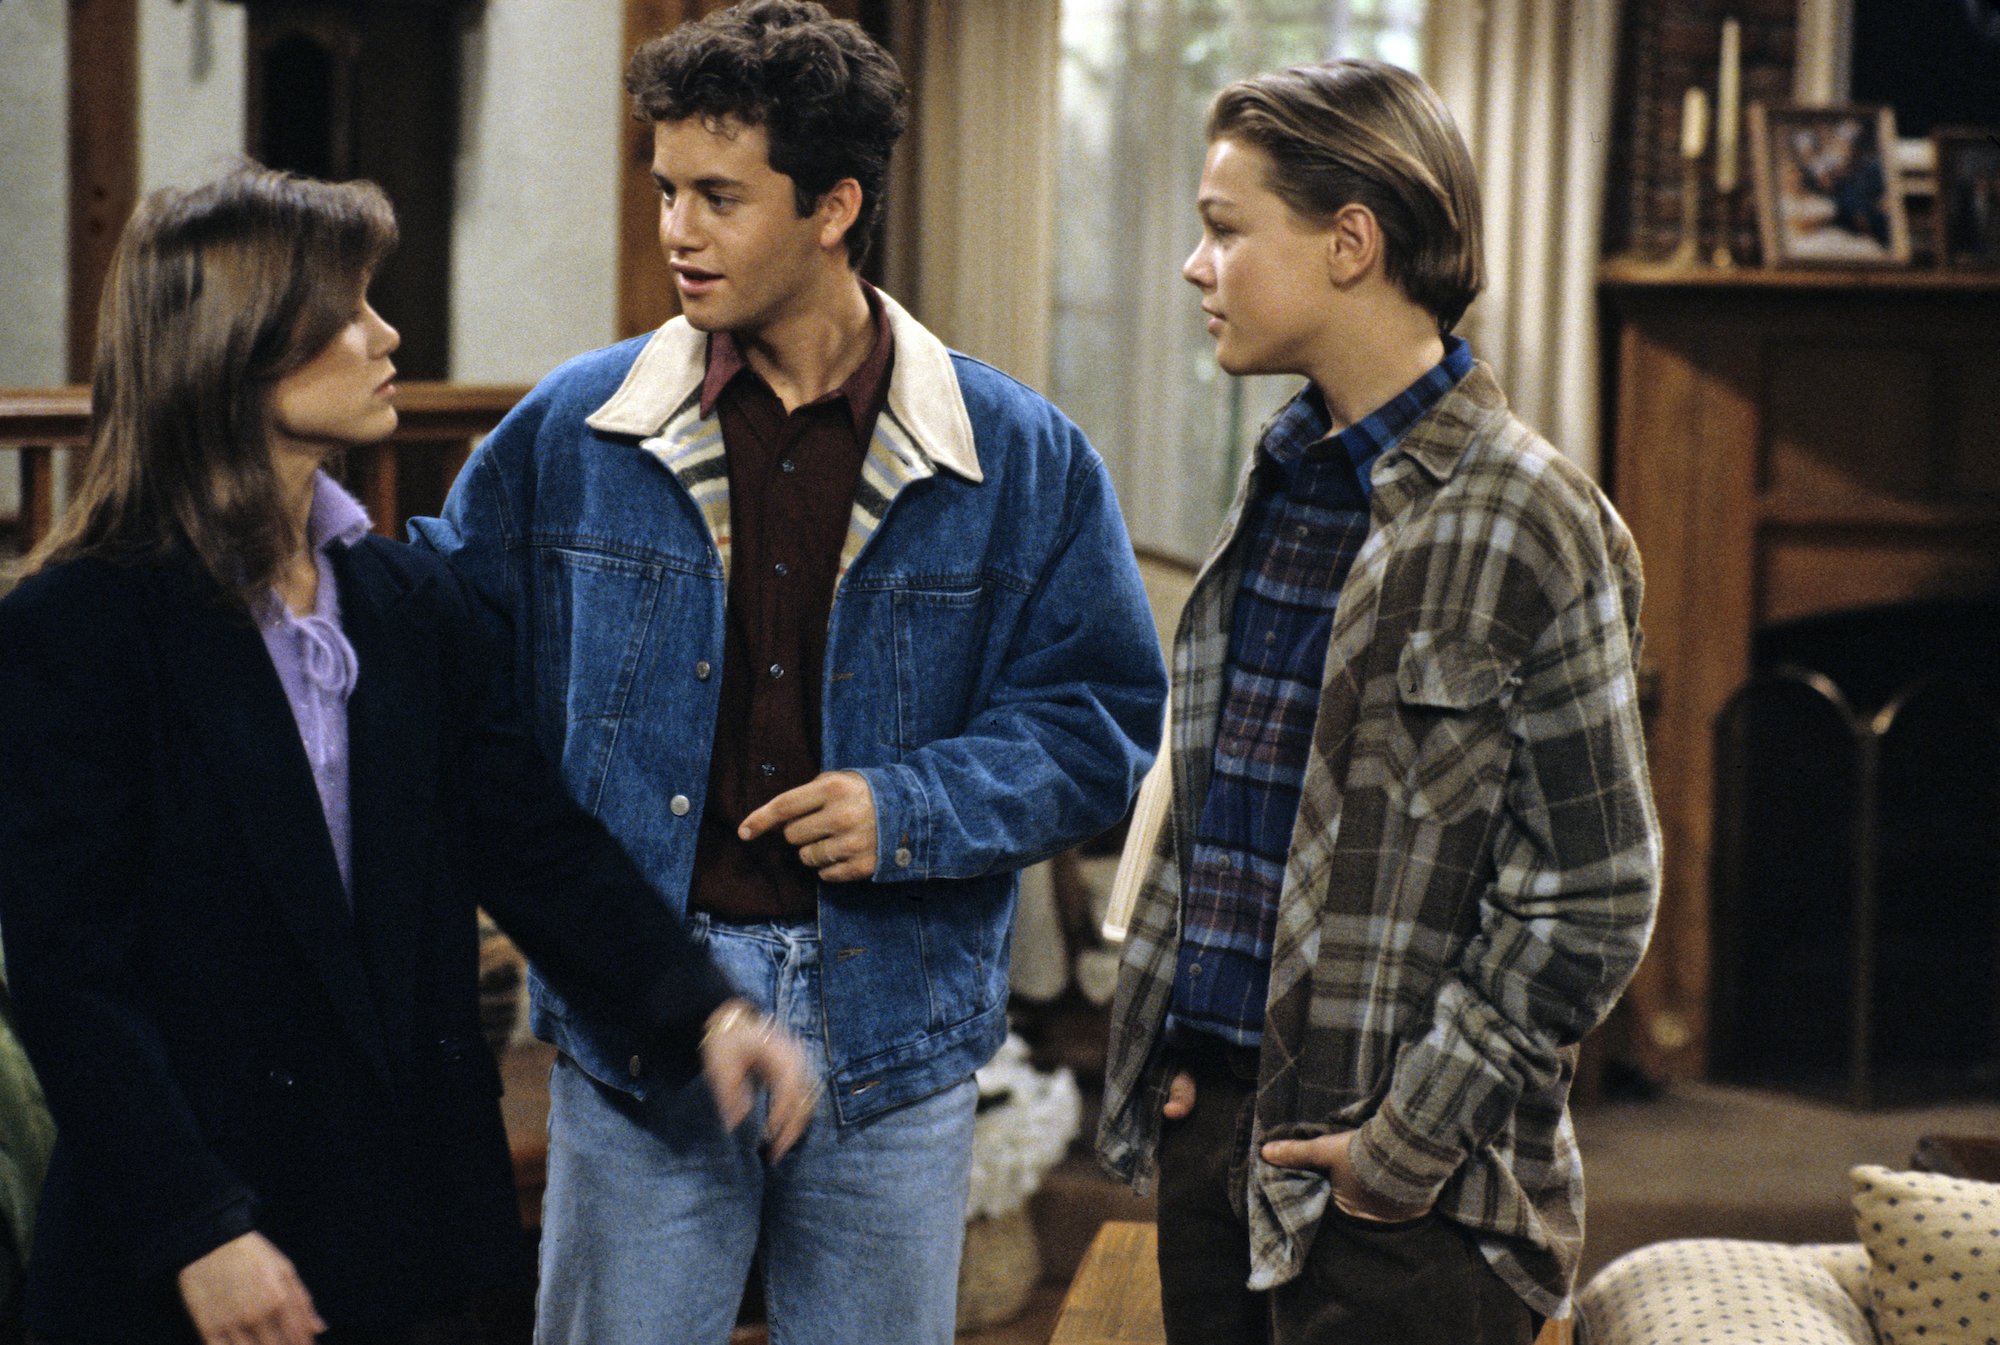 ‘Growing Pains’: Kirk Cameron Got the Role of Mike Because of Asking 1 Question